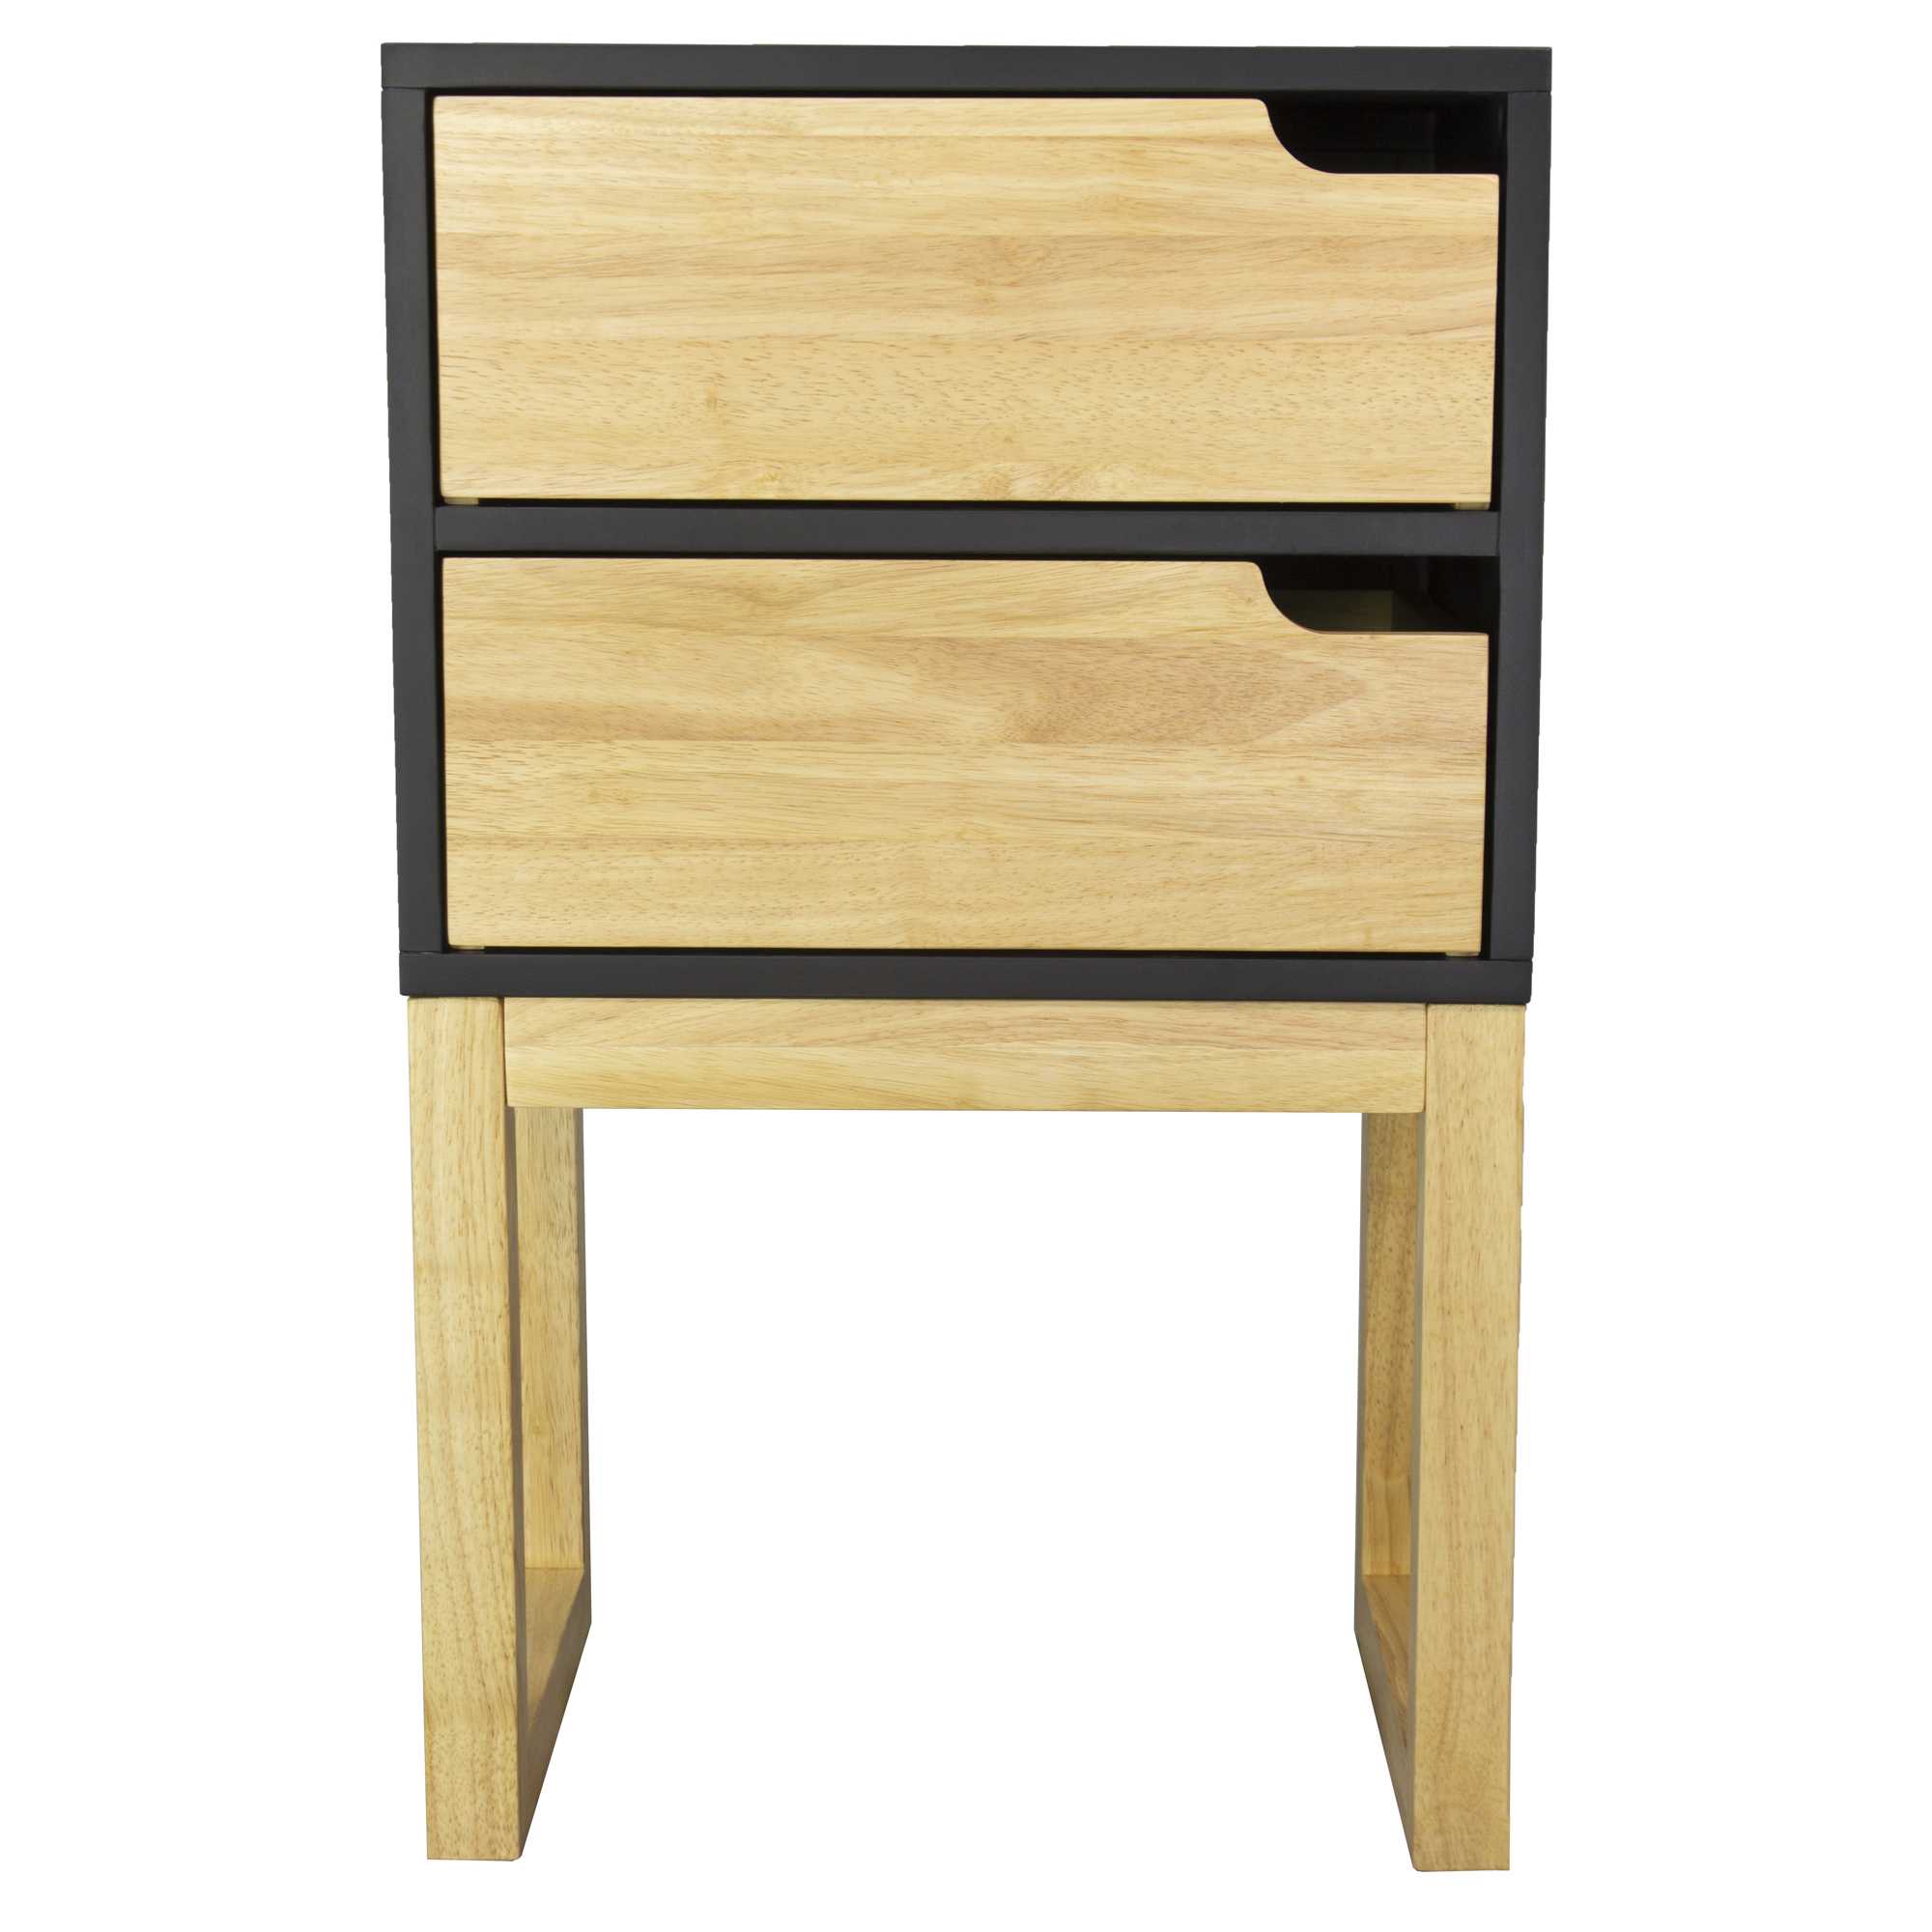 16" X 12" X 26" Black & Natural Solid Wood Two Drawer Side Table